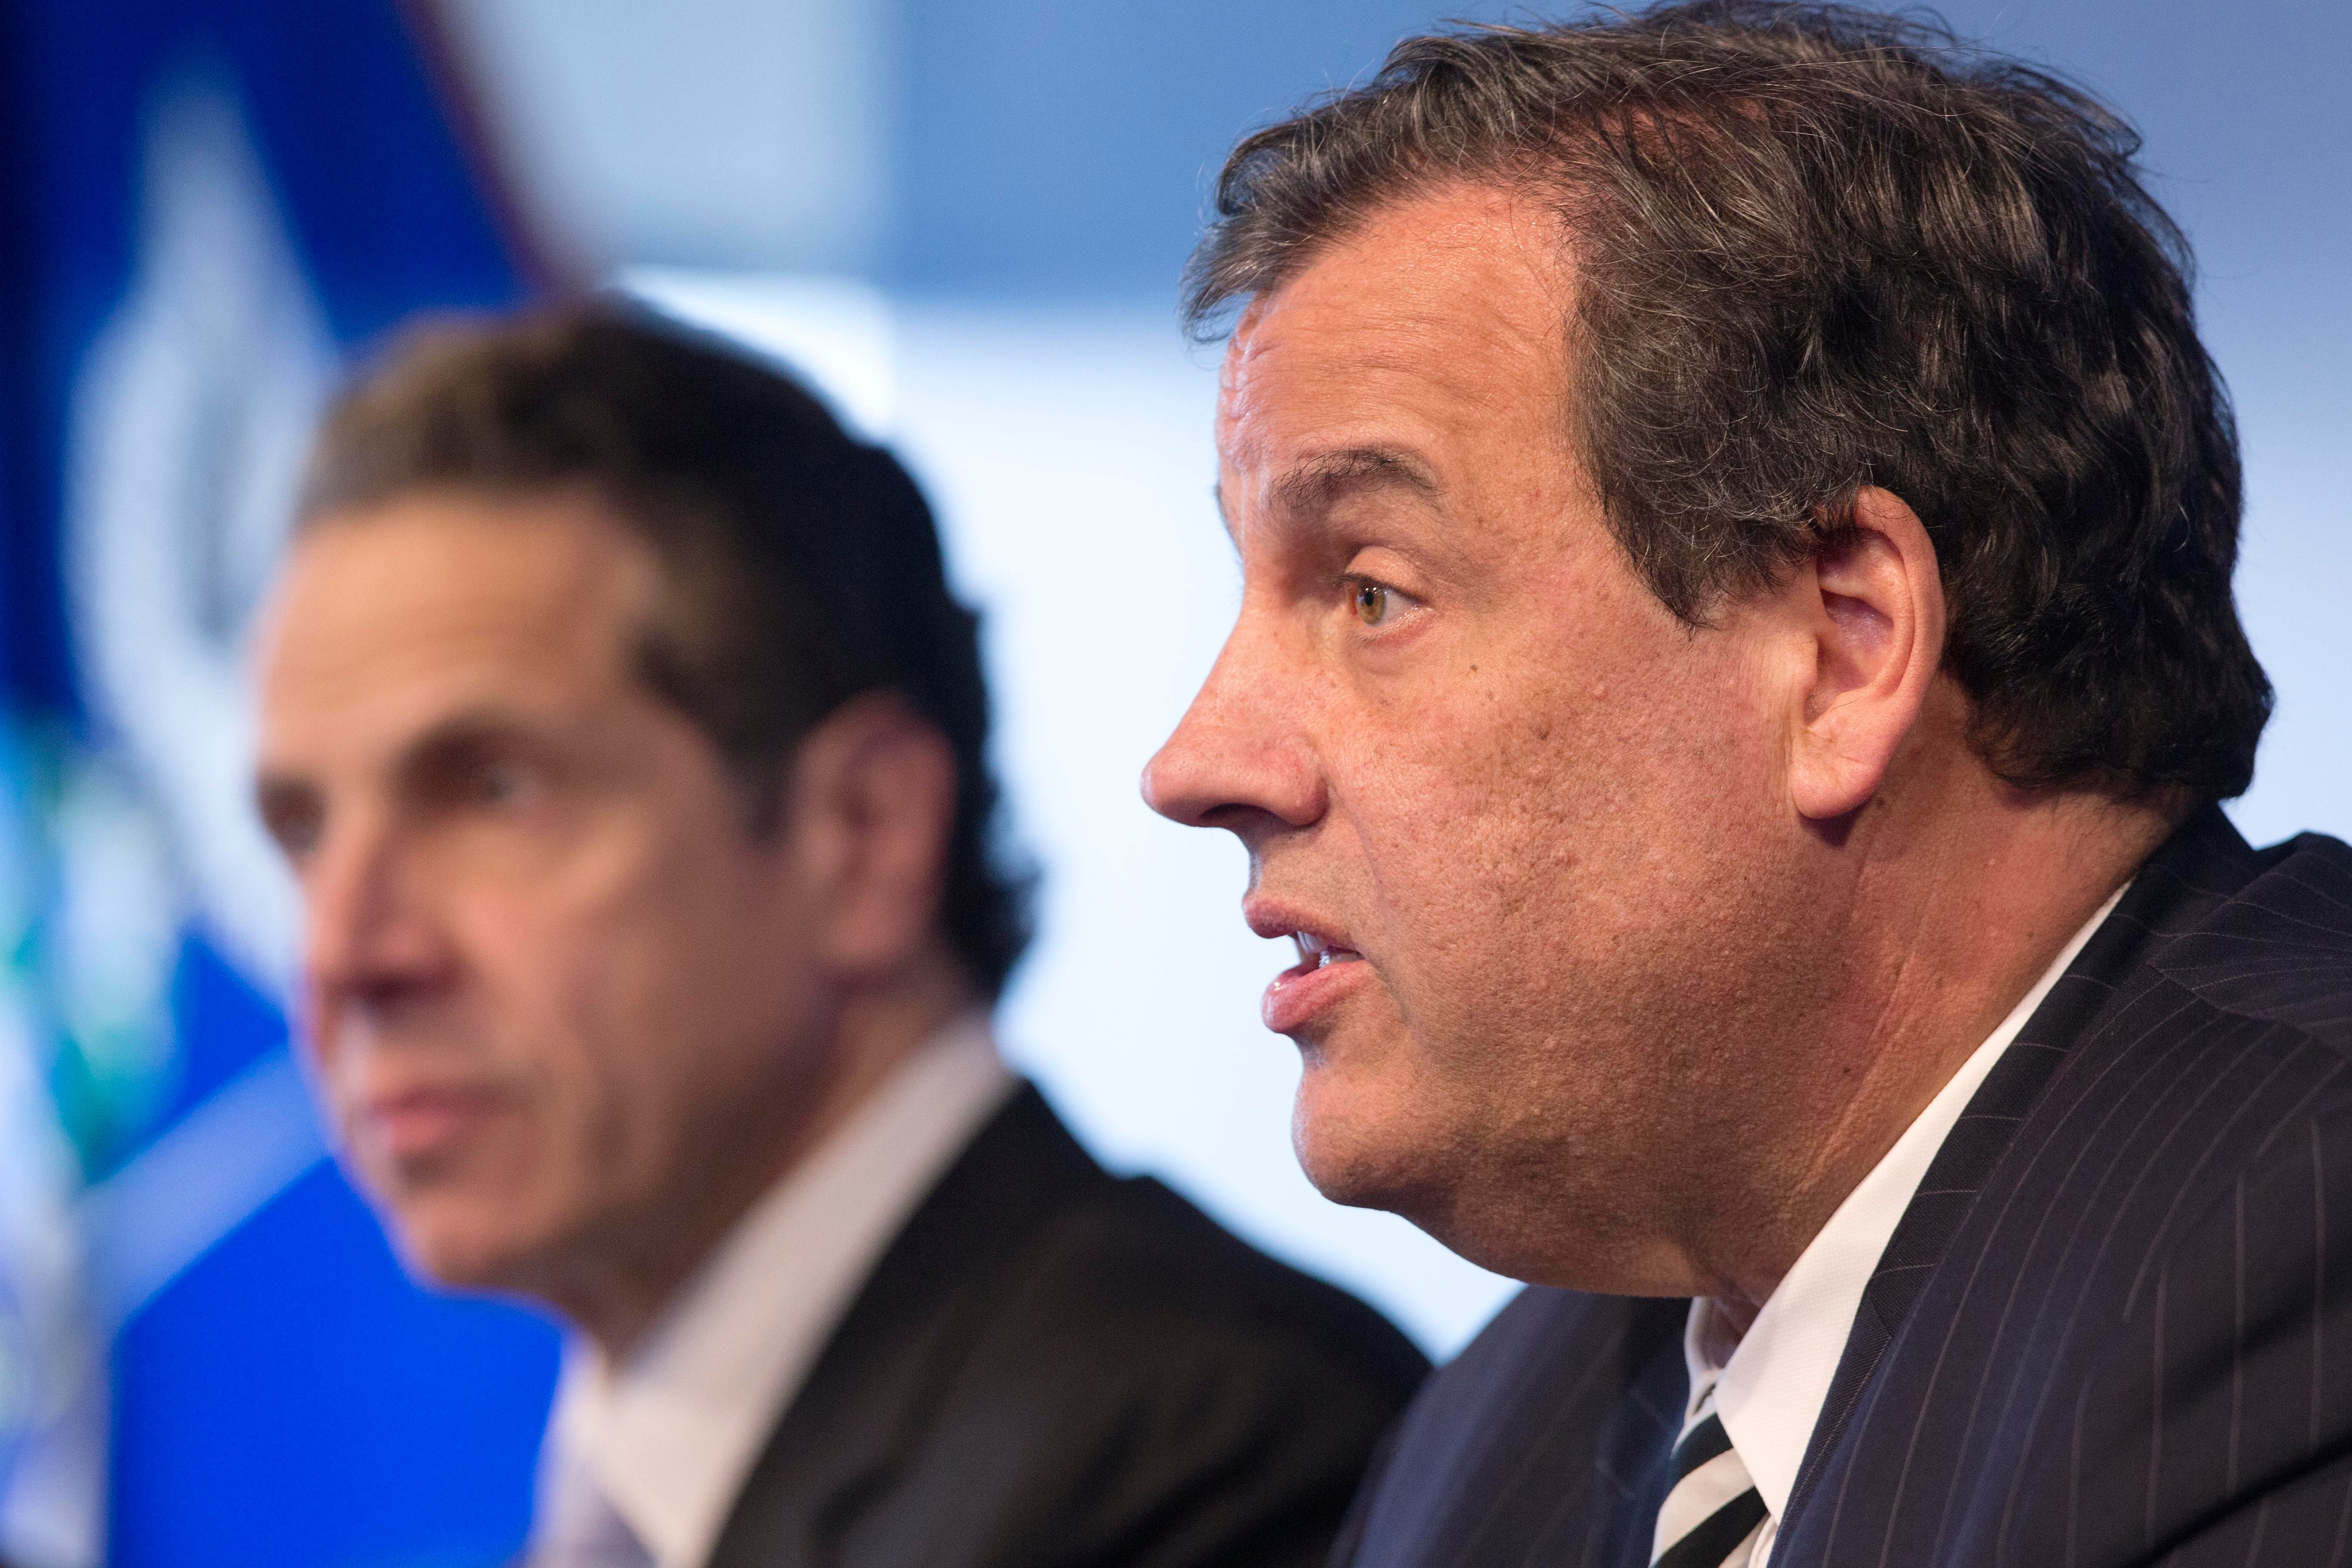 New York Governor Andrew Cuomo listens as New Jersey Governor Chris Christie talks at a news conference ON Oct. 24, 2014 in New York. (Mark Lennihan—AP)